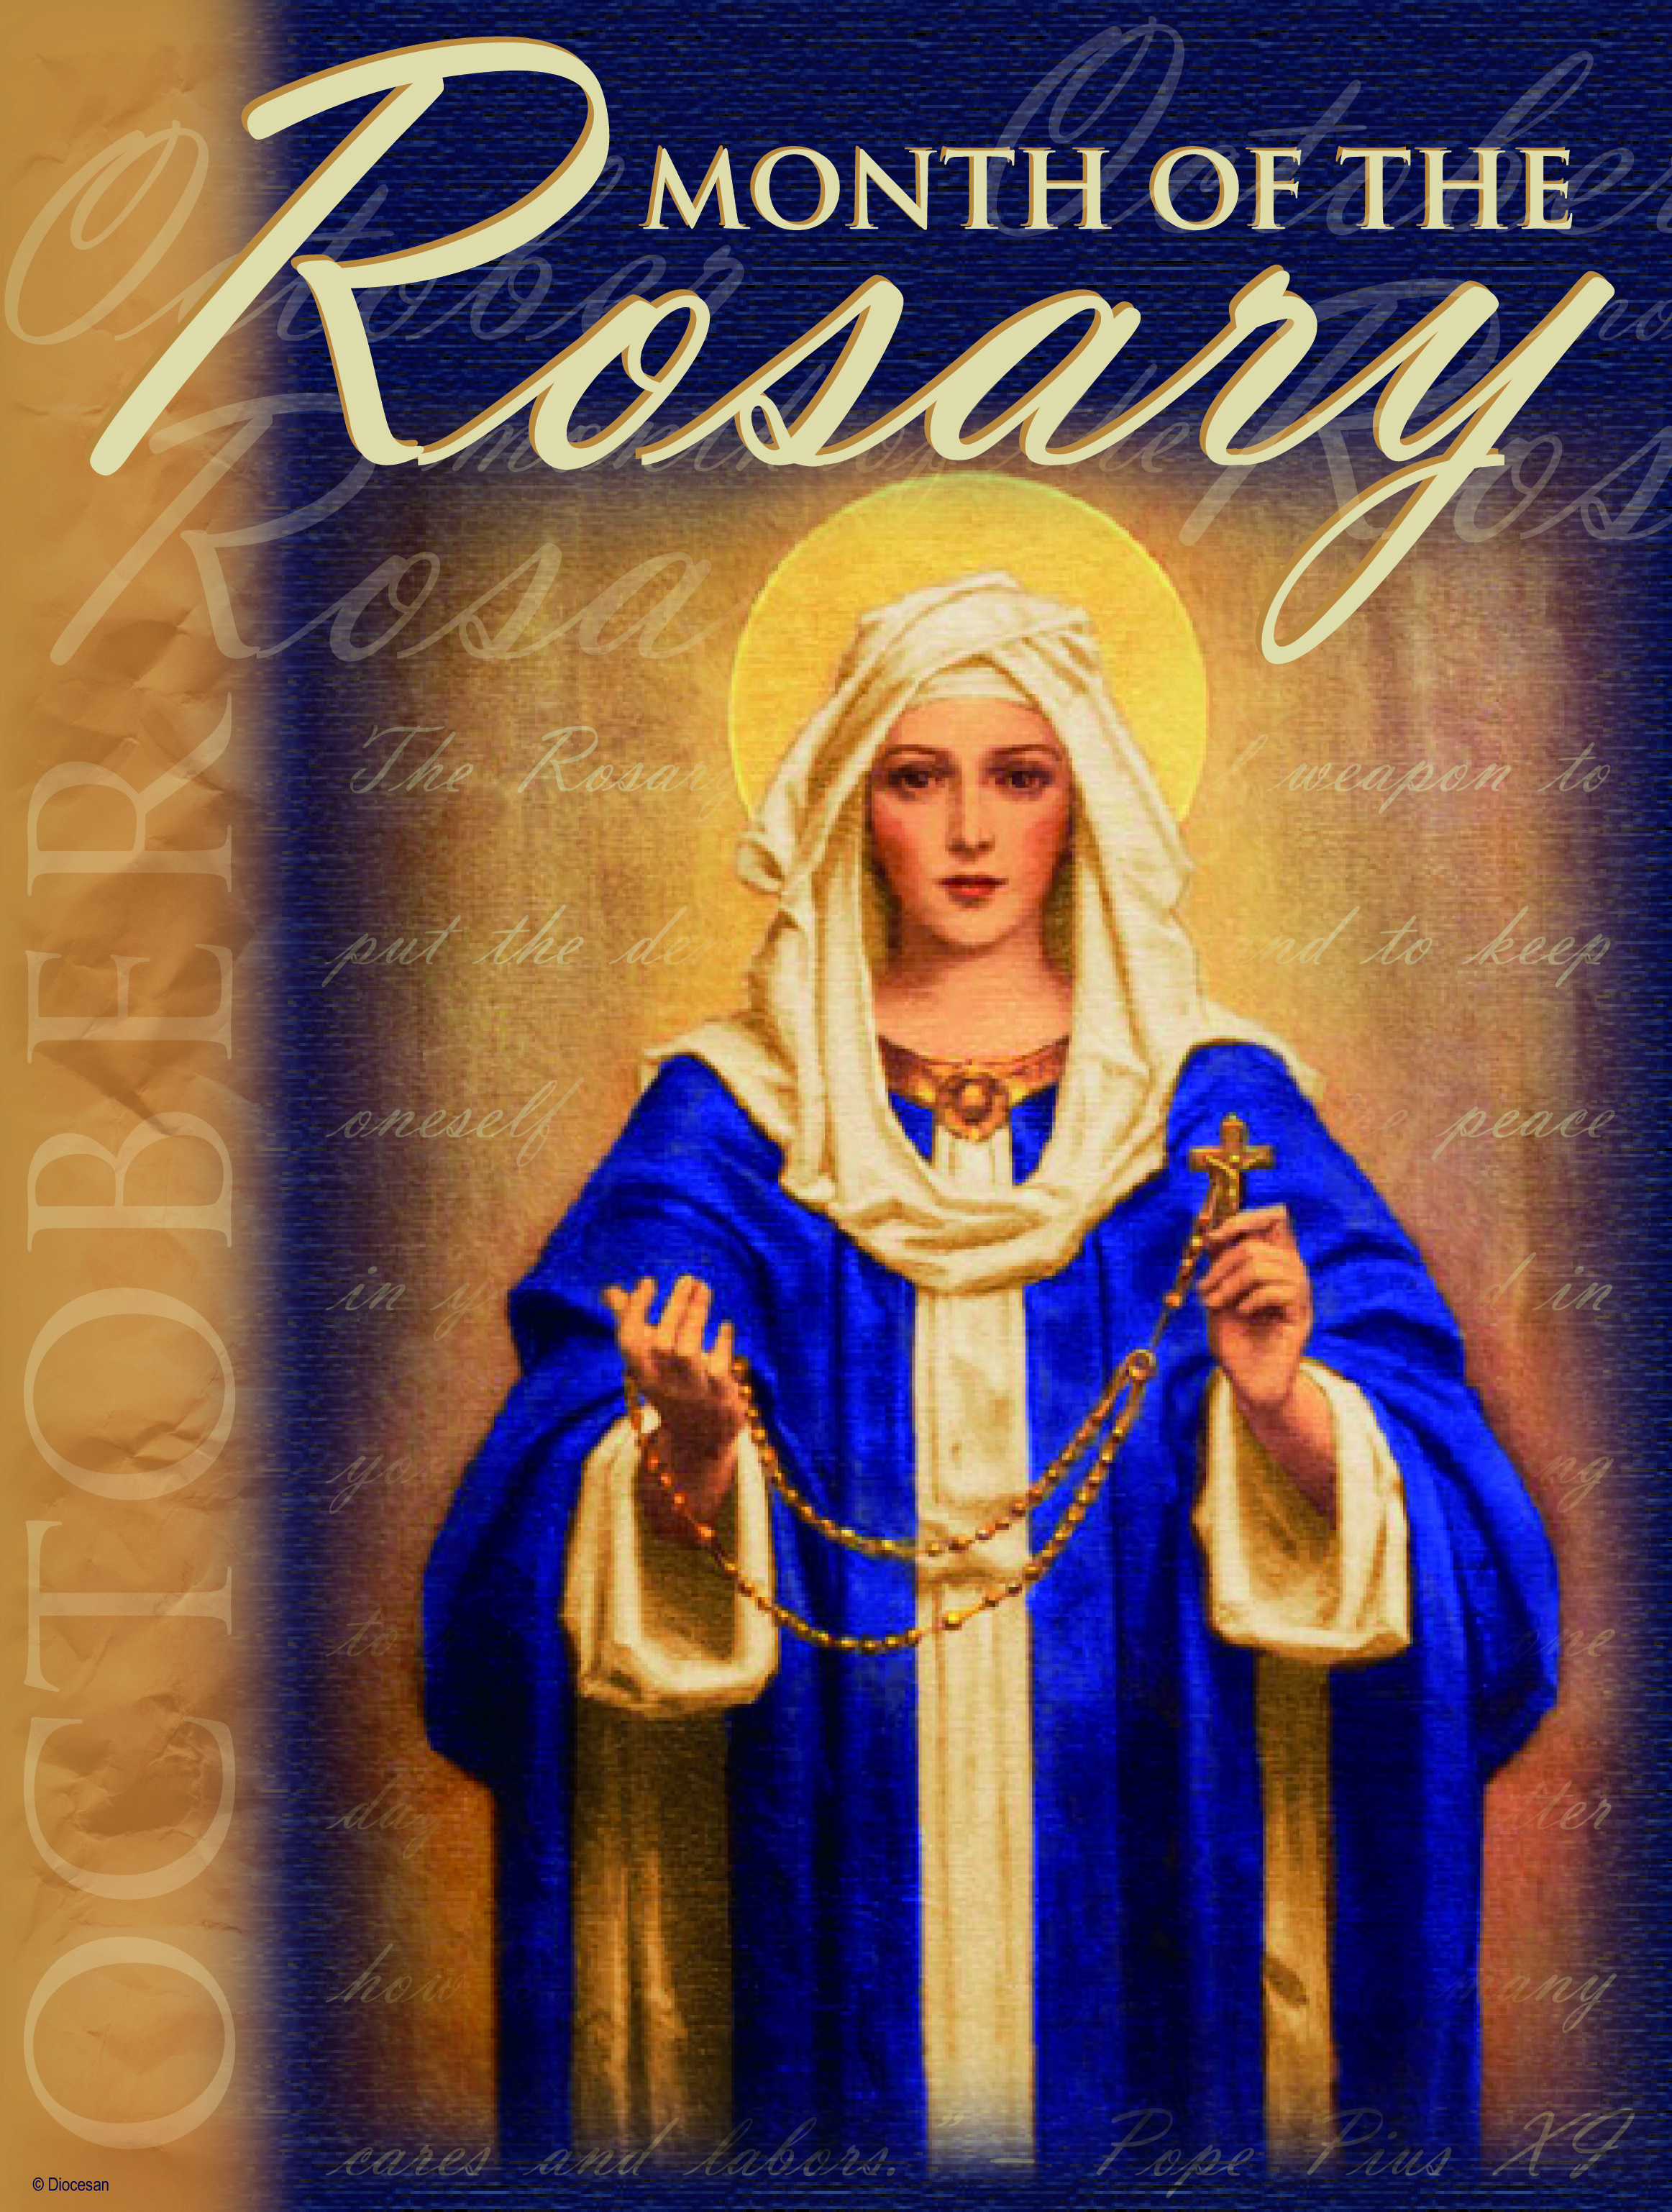 October - Dedicated to the Rosary - G